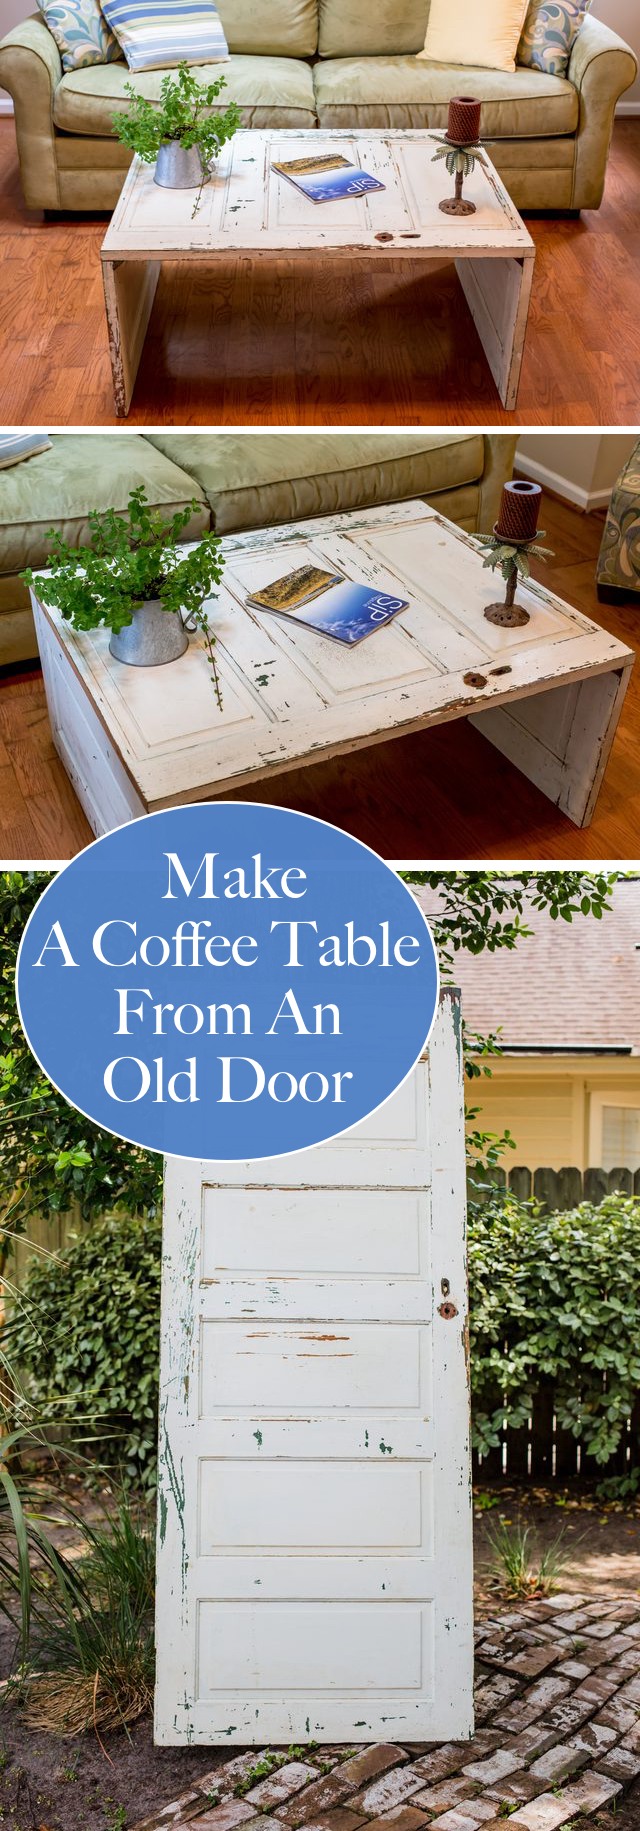 Make a Coffee Table From an Old Door